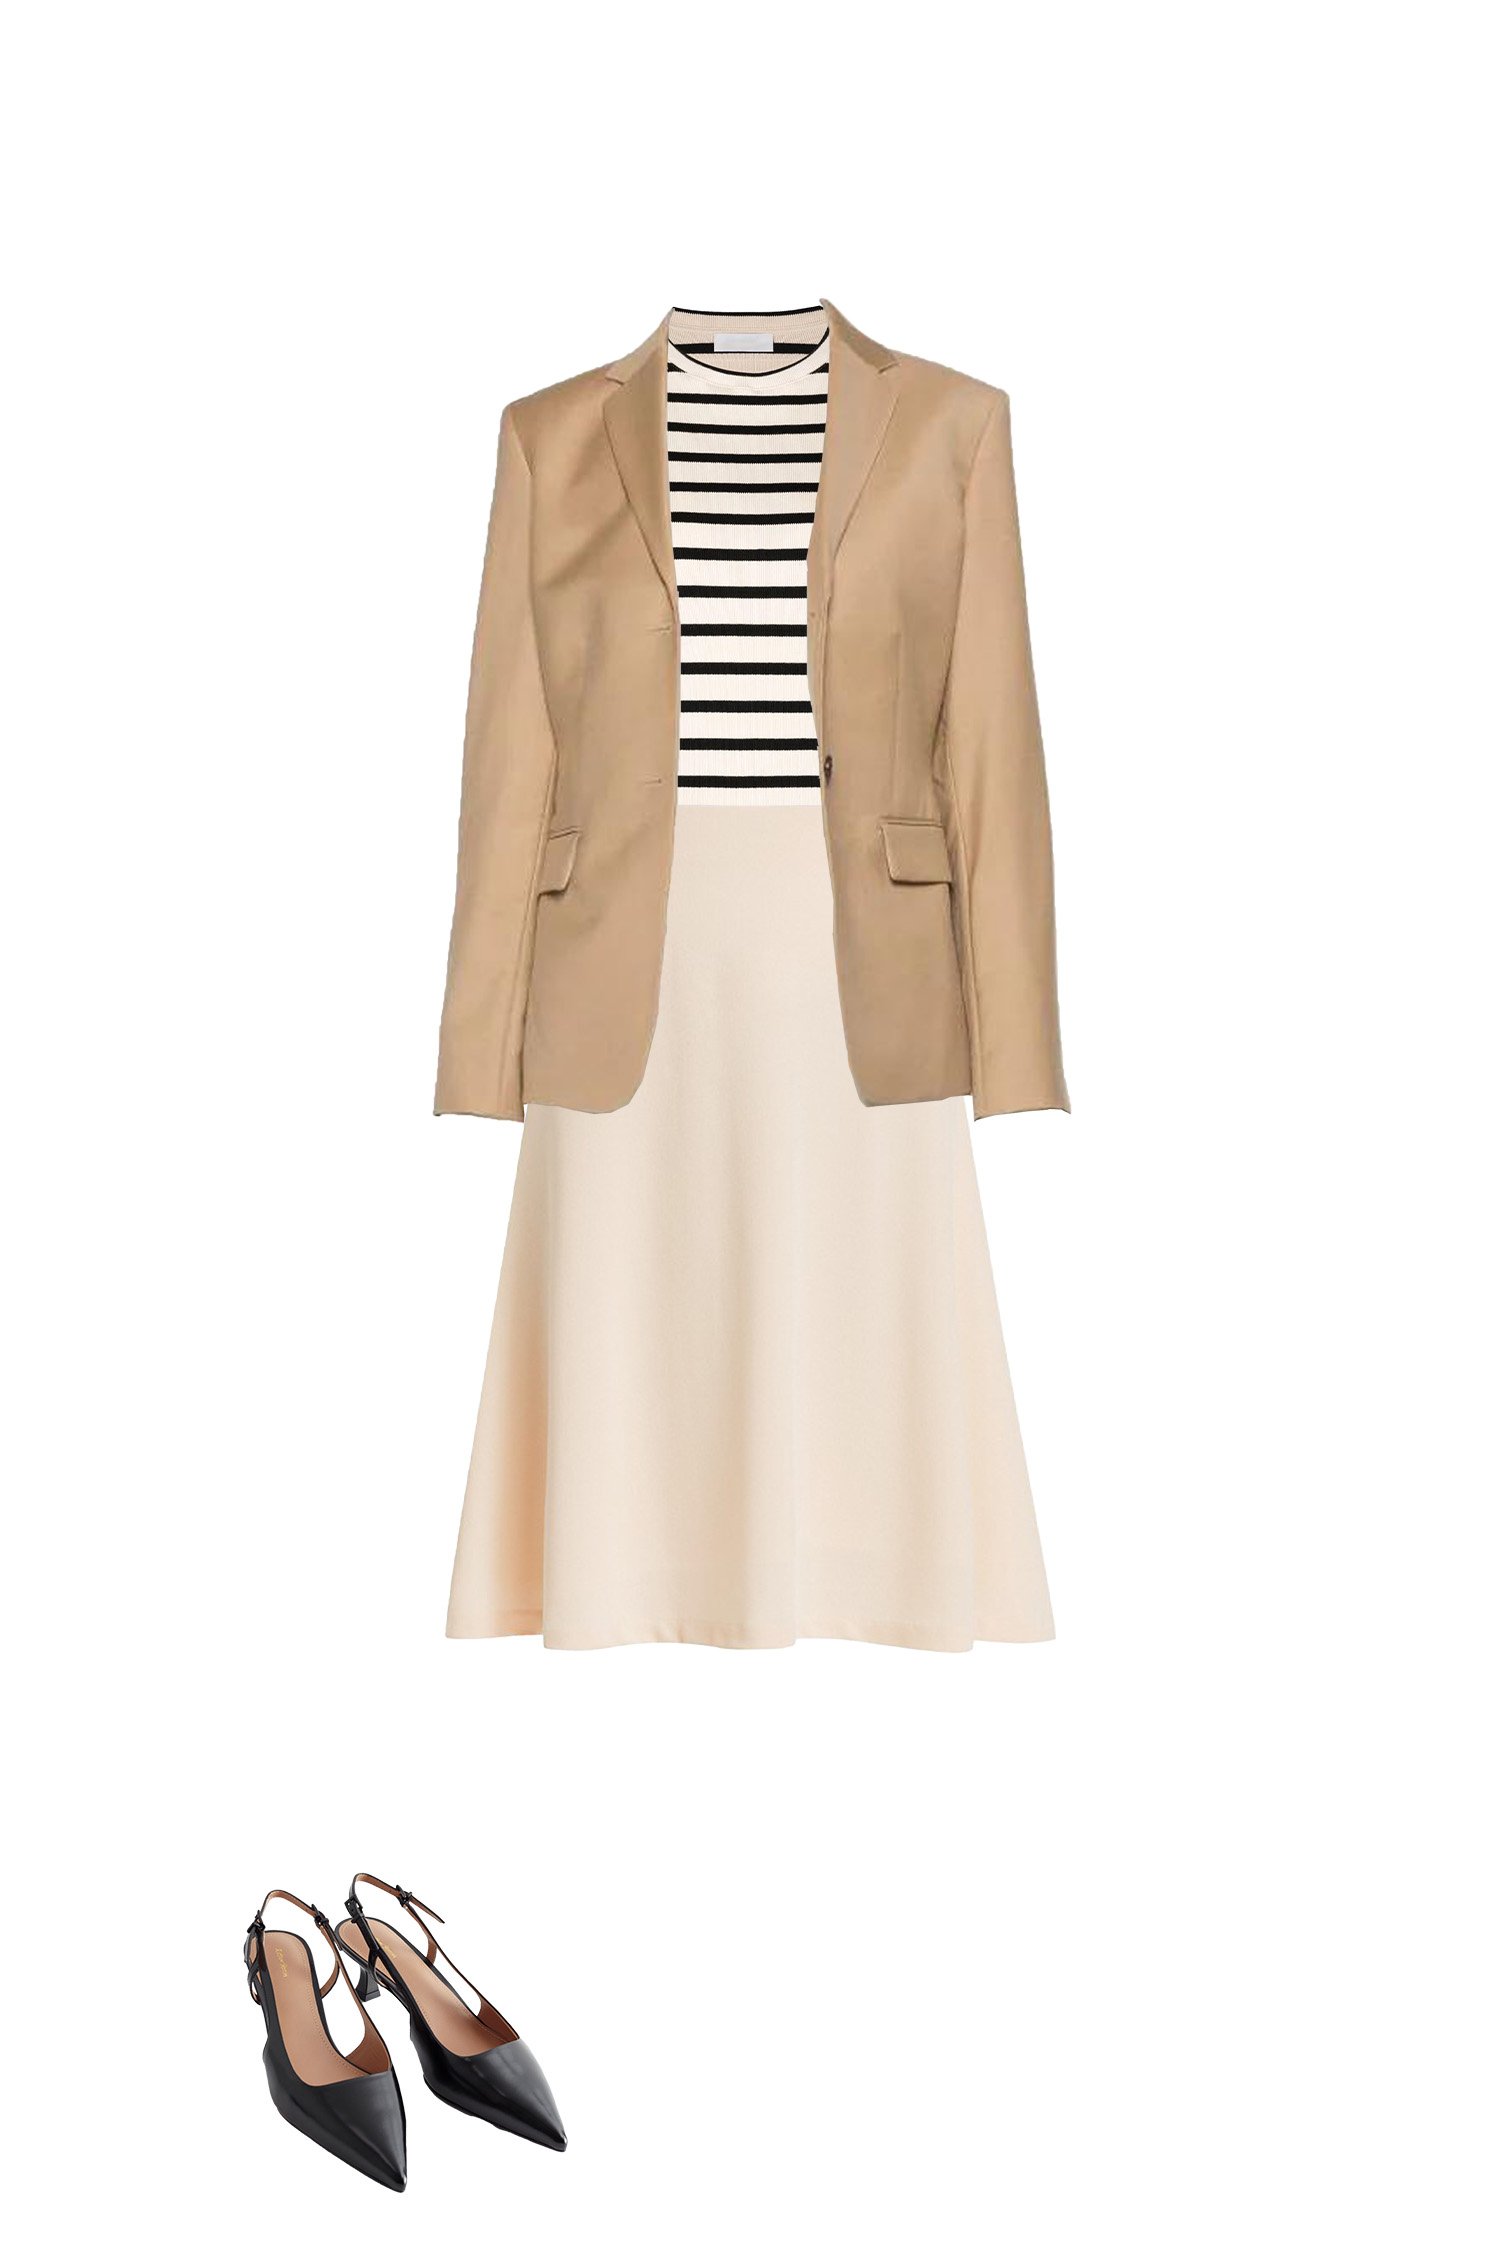 Business Casual Outfit - Cream A-Line Skirt, Cream and Black Stripe Knit Top, Camel Blazer, Black Pointy Toe Sling Backs